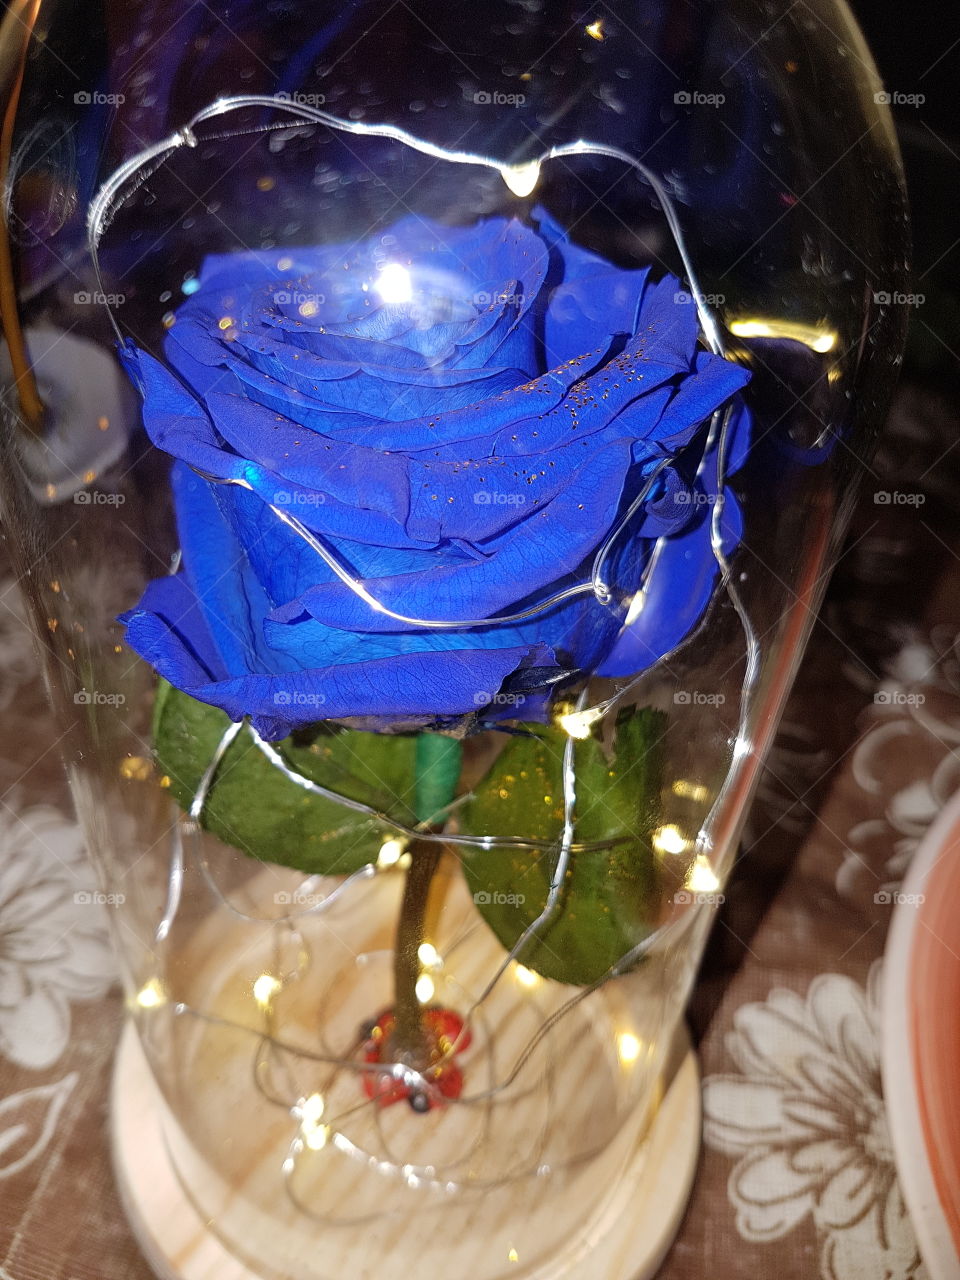 The way to my heart is Blue Roses